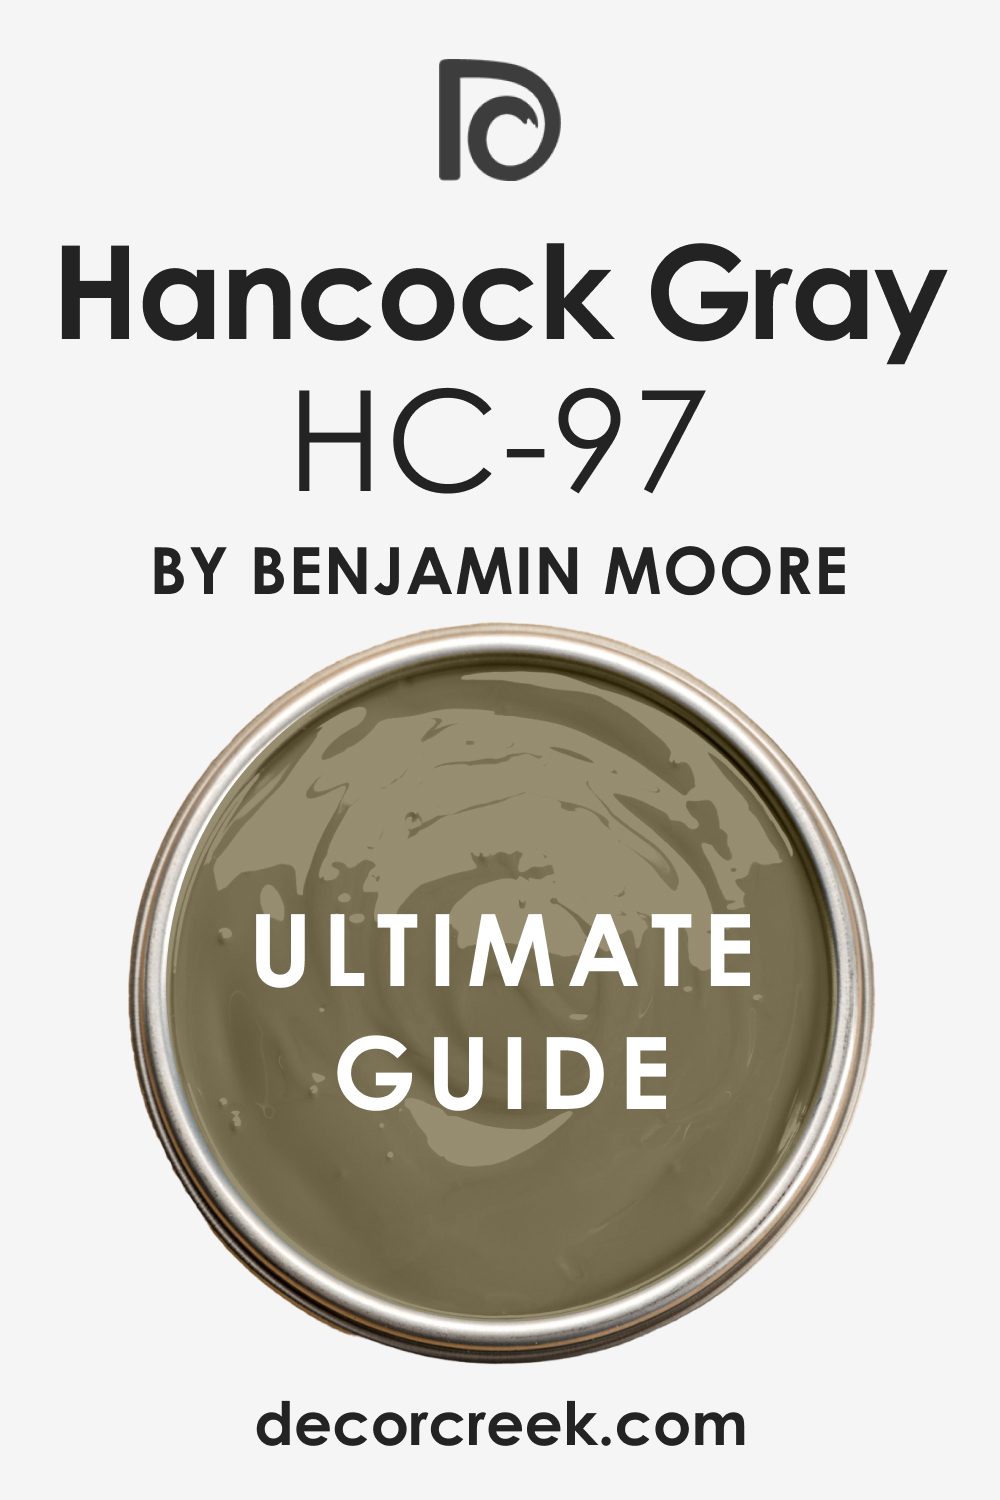 Ultimate Guide. Hancock Gray HC-97 Paint Color by Benjamin Moore